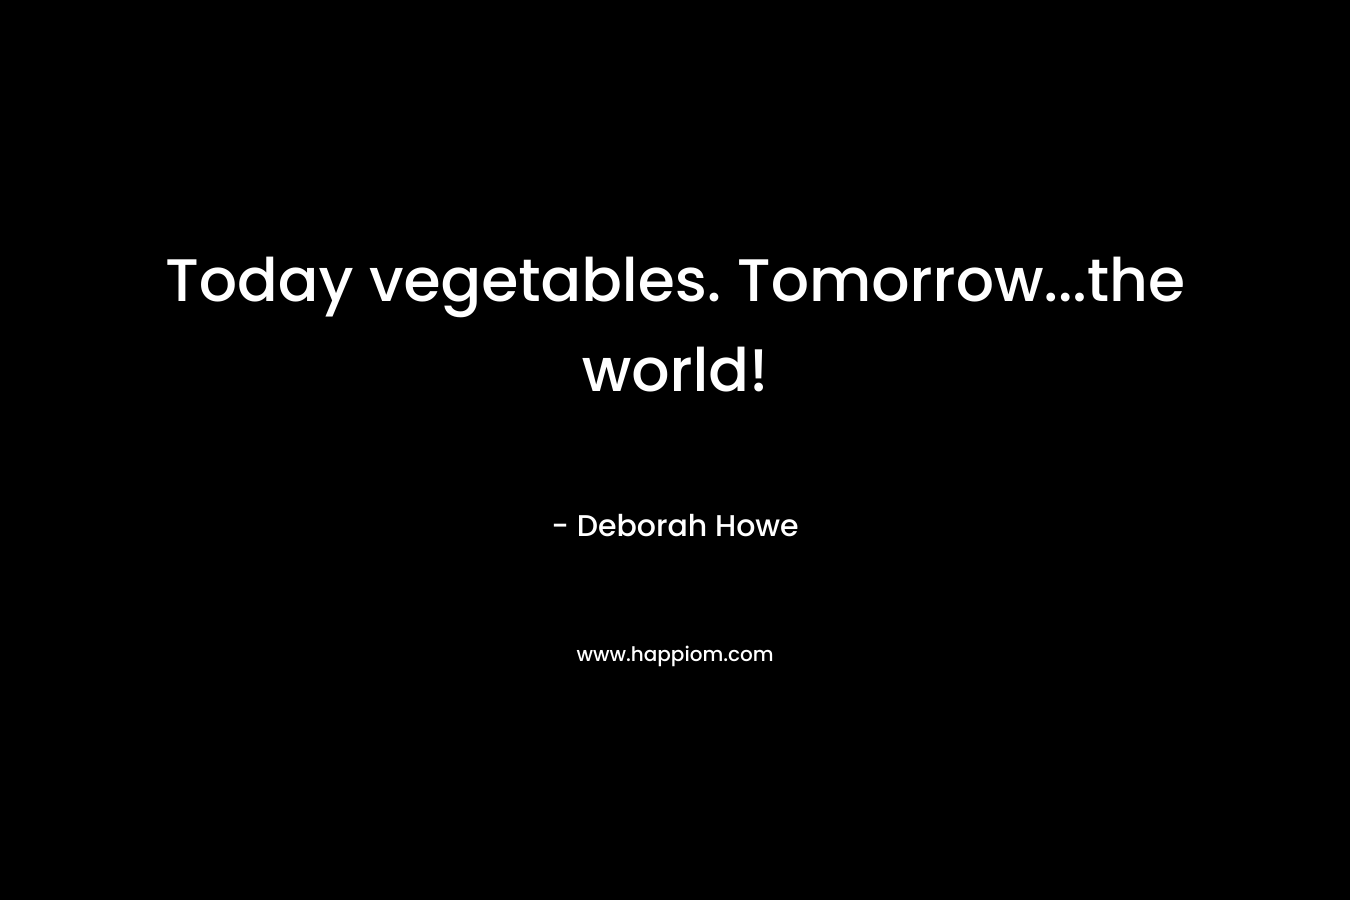 Today vegetables. Tomorrow...the world!